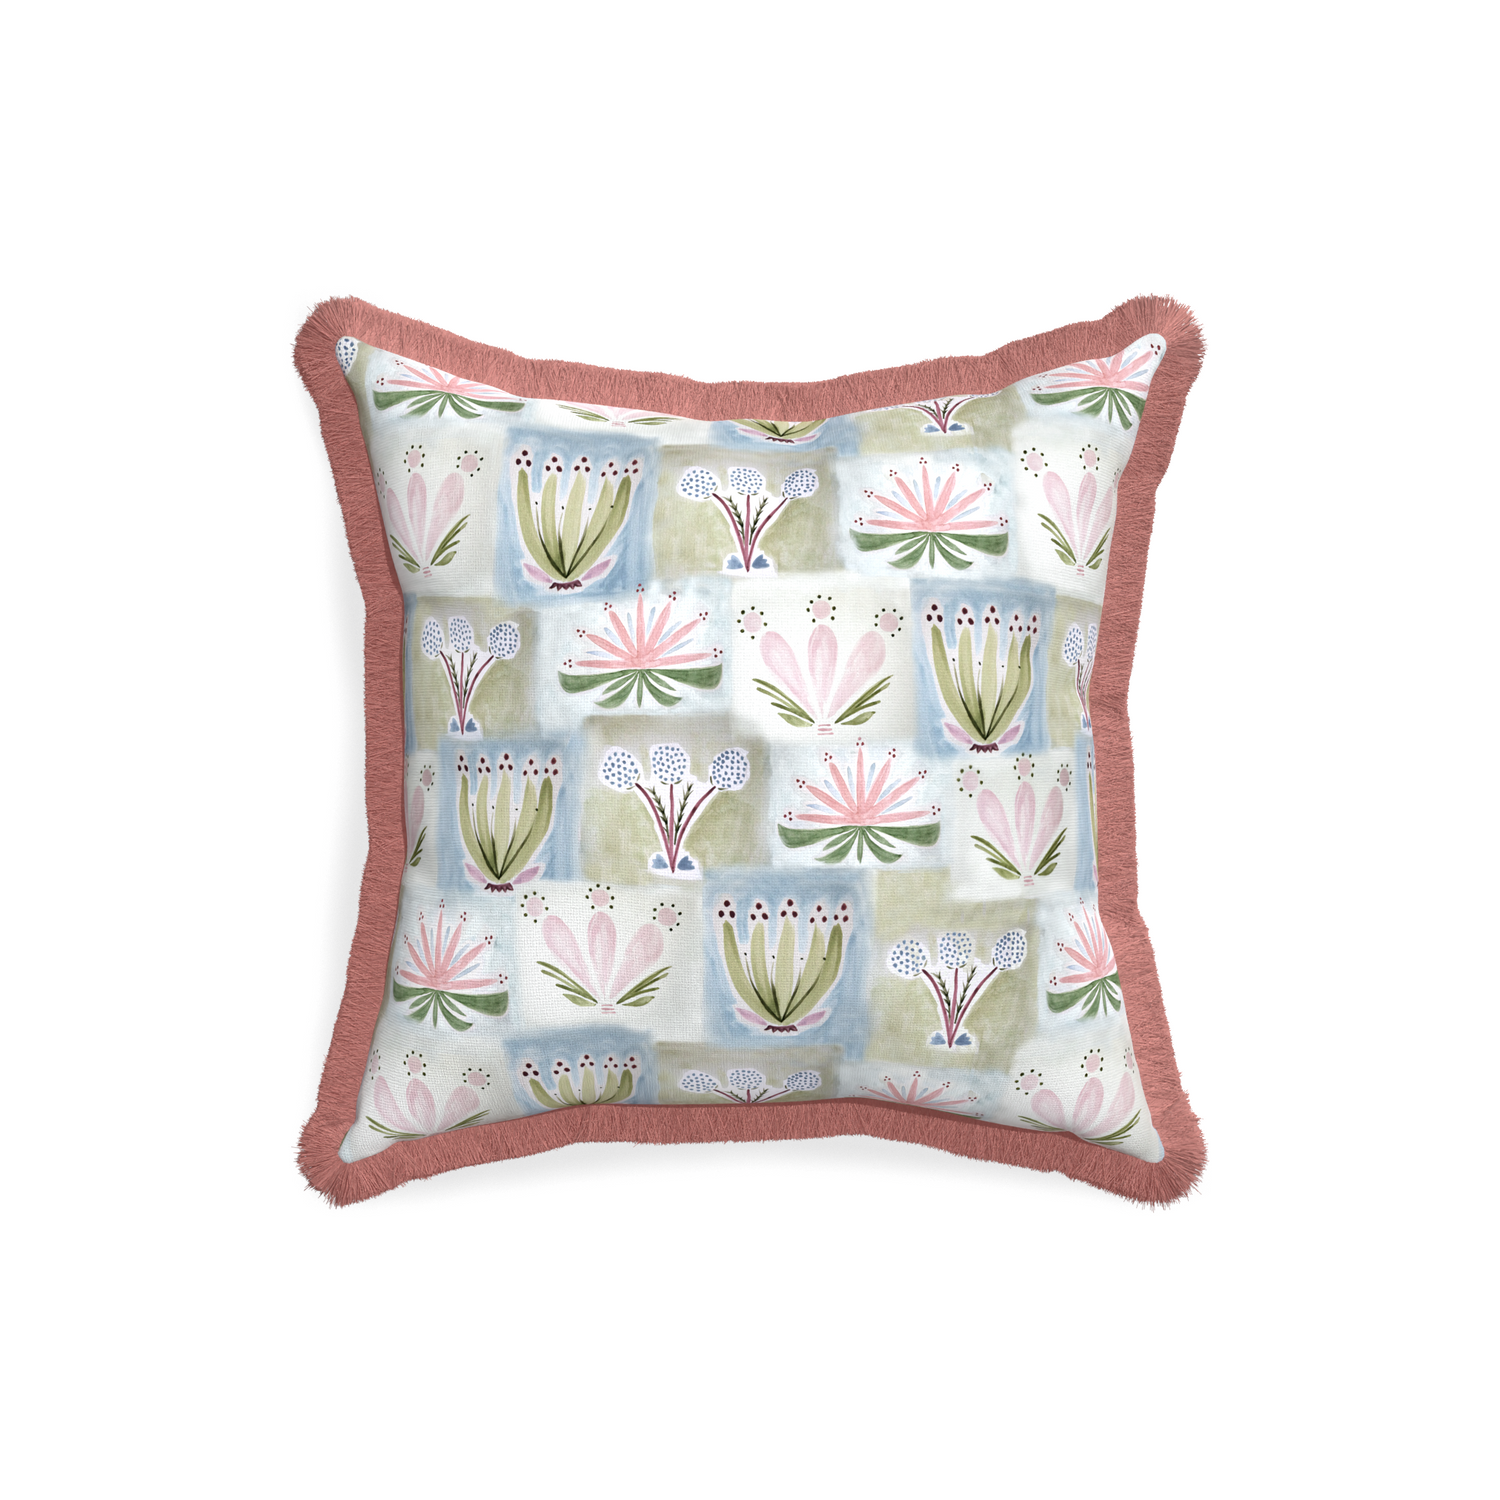 18-square harper custom hand-painted floralpillow with d fringe on white background